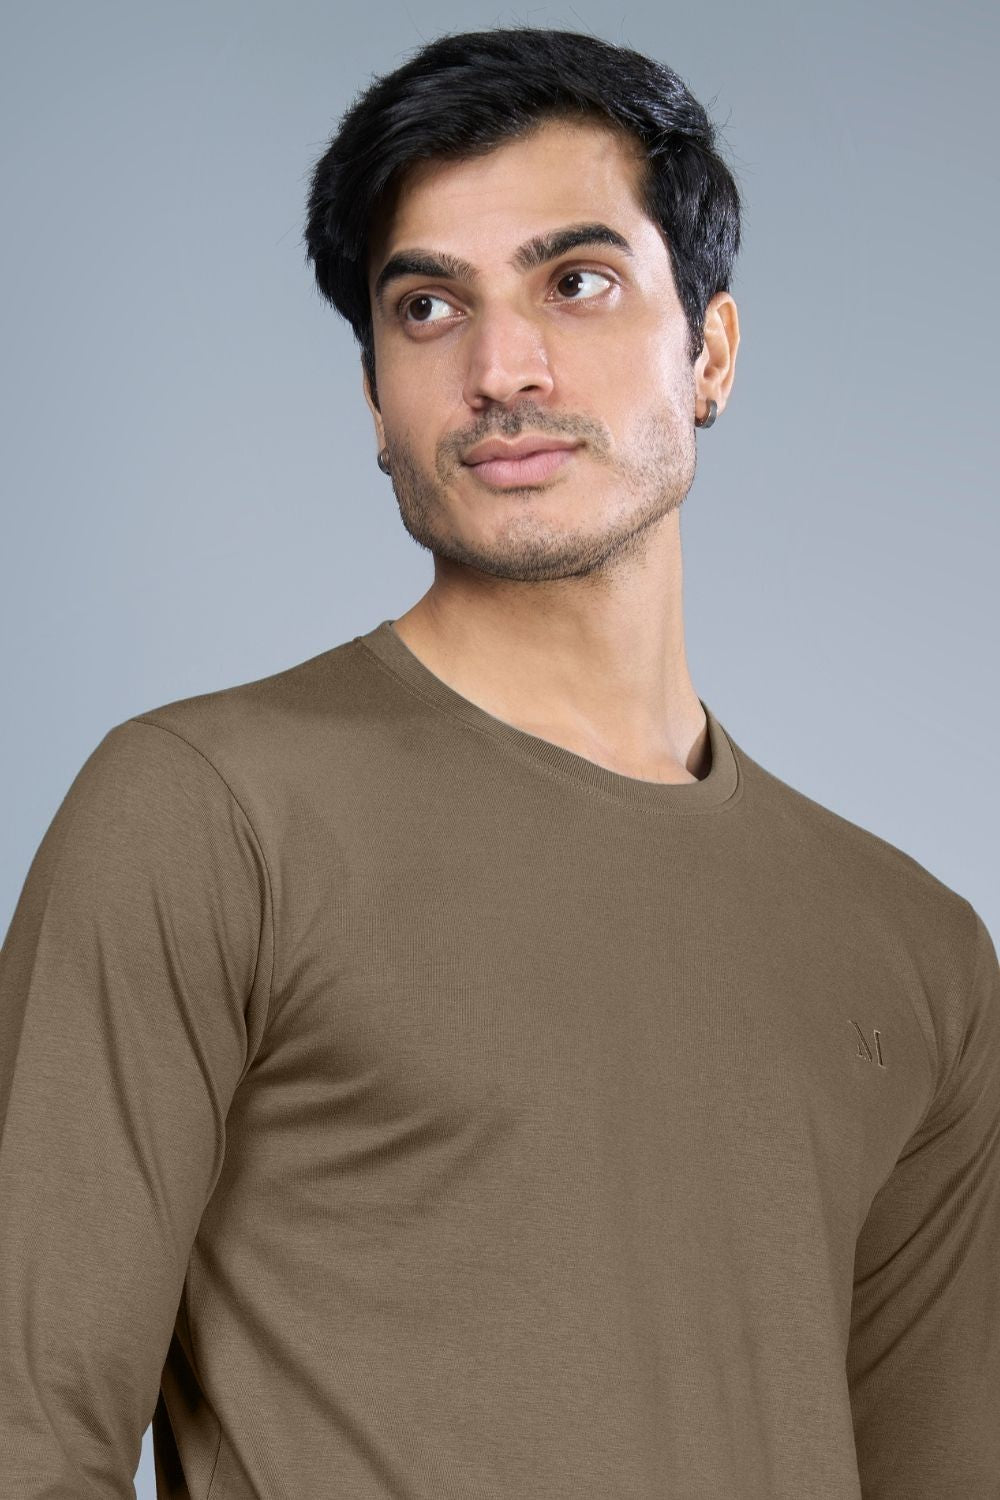 Teak colored, full sleeve solid T shirt for Men with round neck, close up.